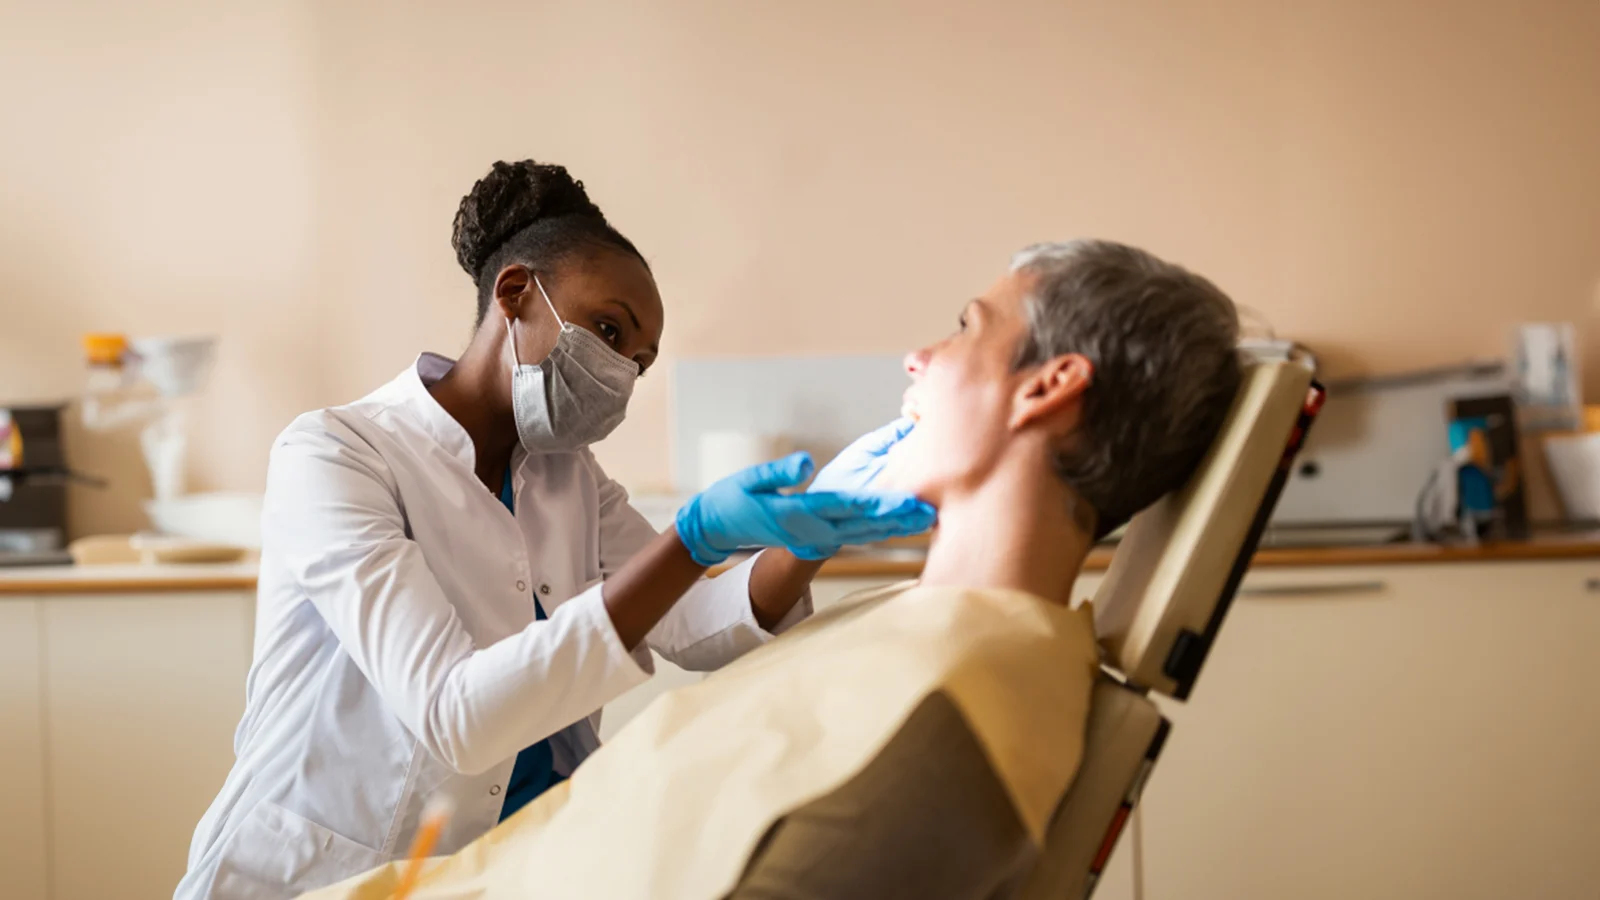 Helps save money, and potentially lives - Dentist checking a patient's mouth